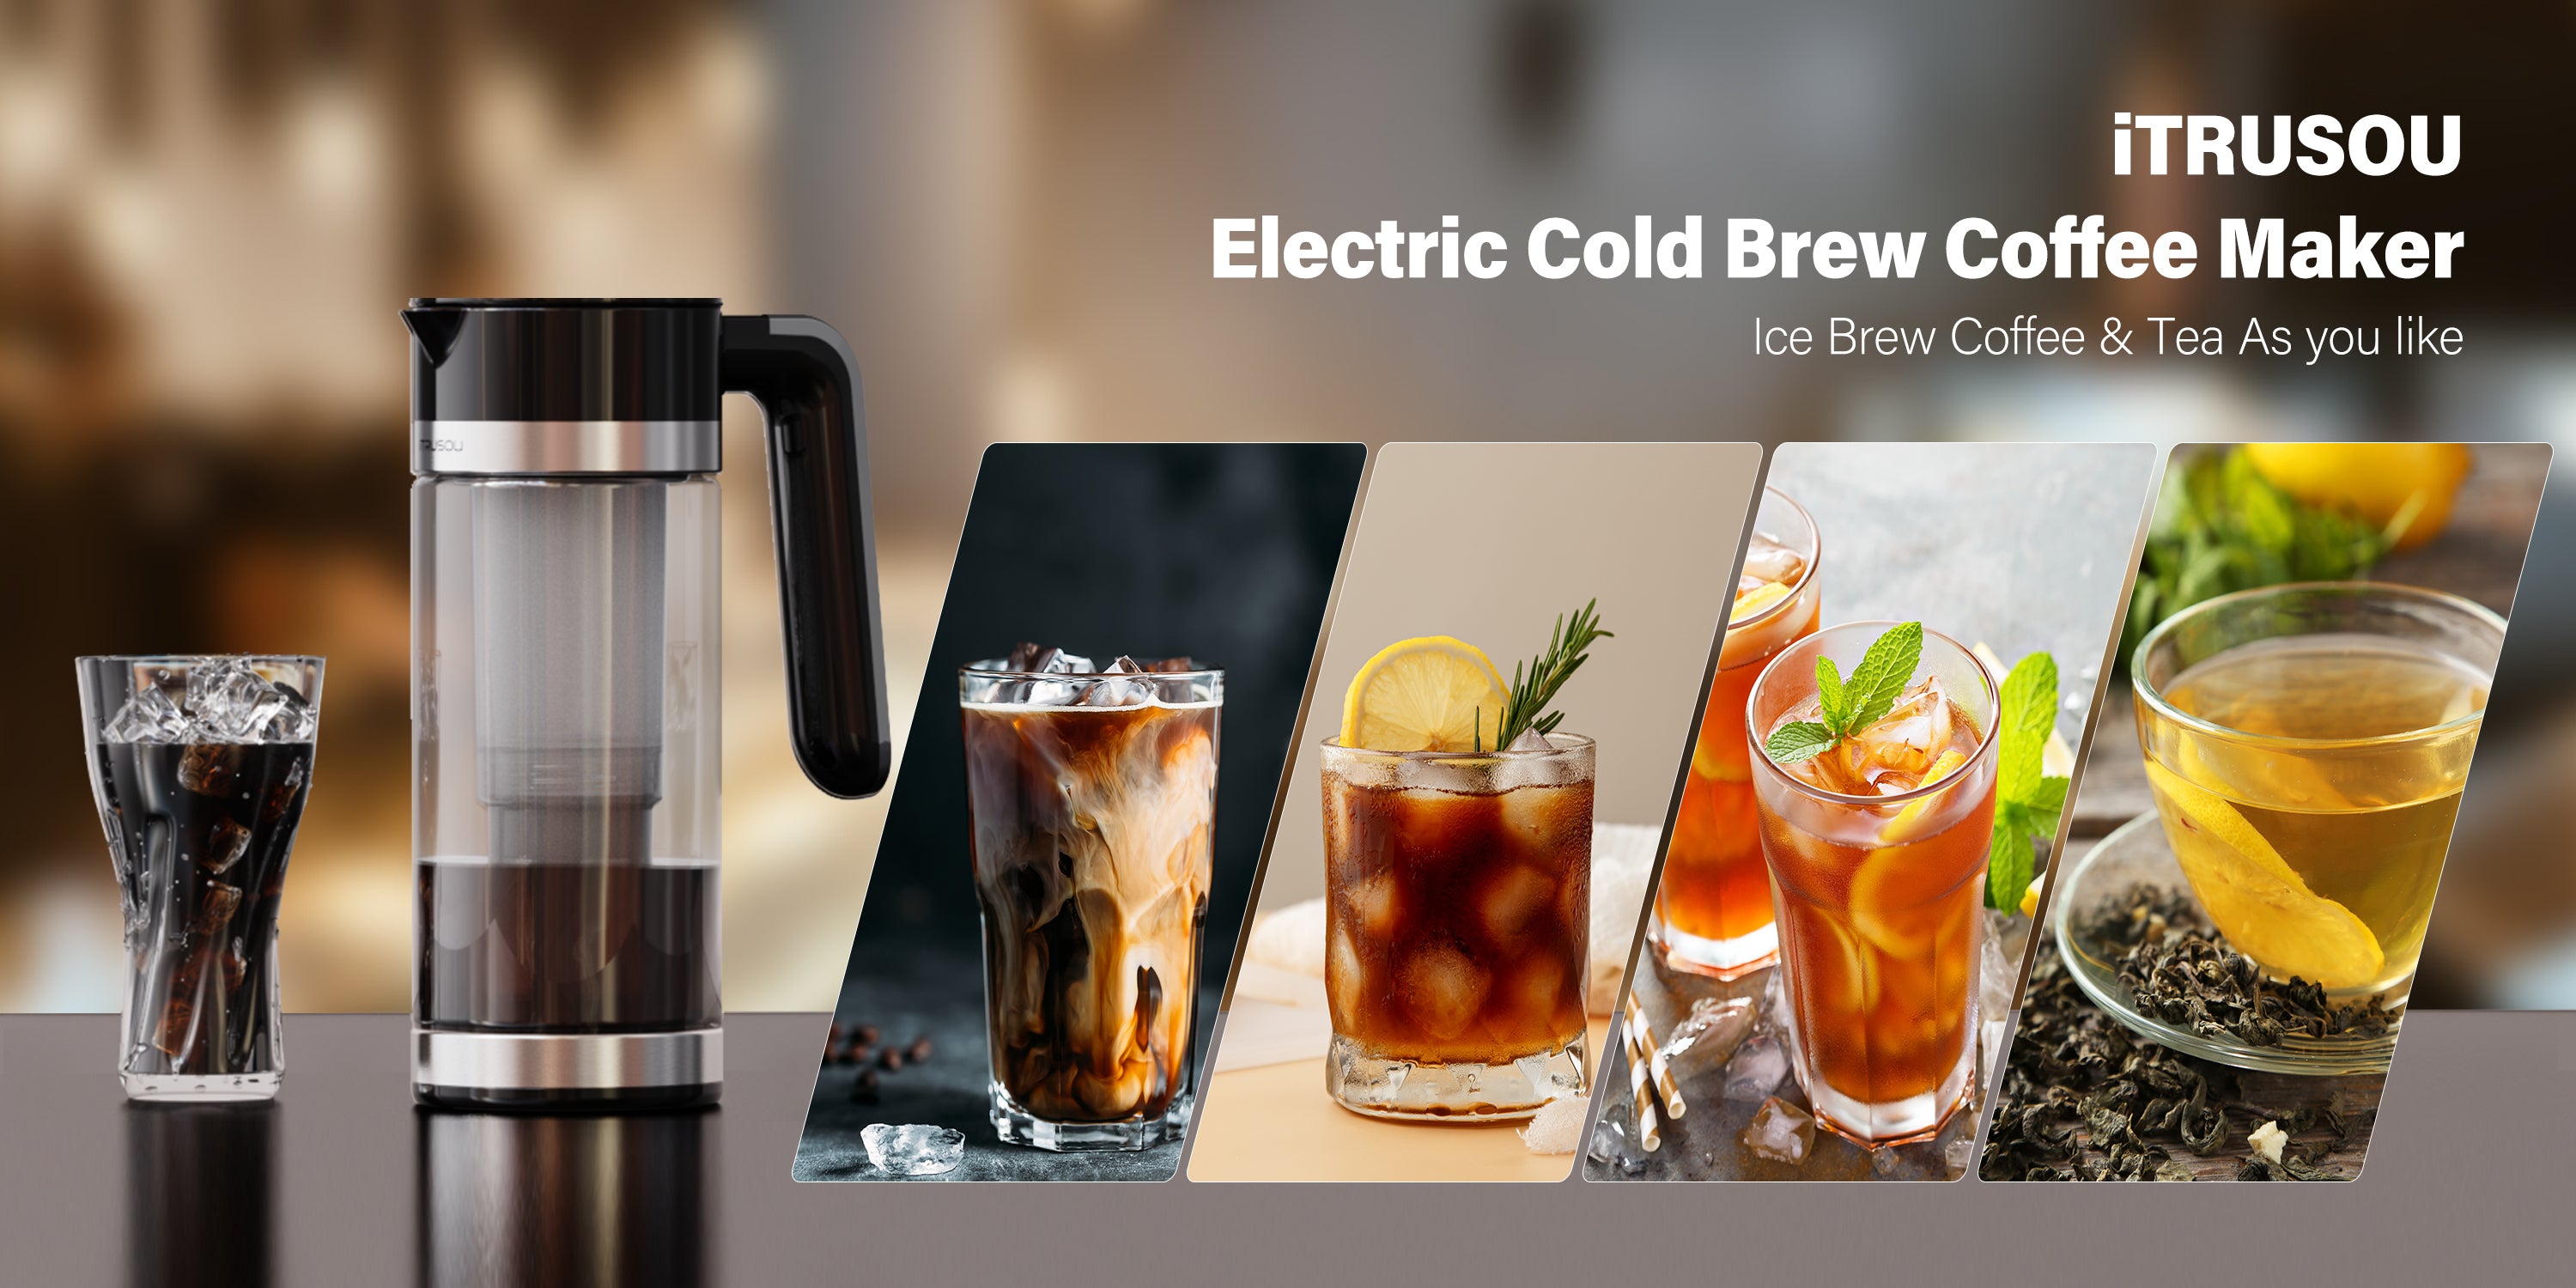 Electric Cold Brew Coffee Maker itrusou